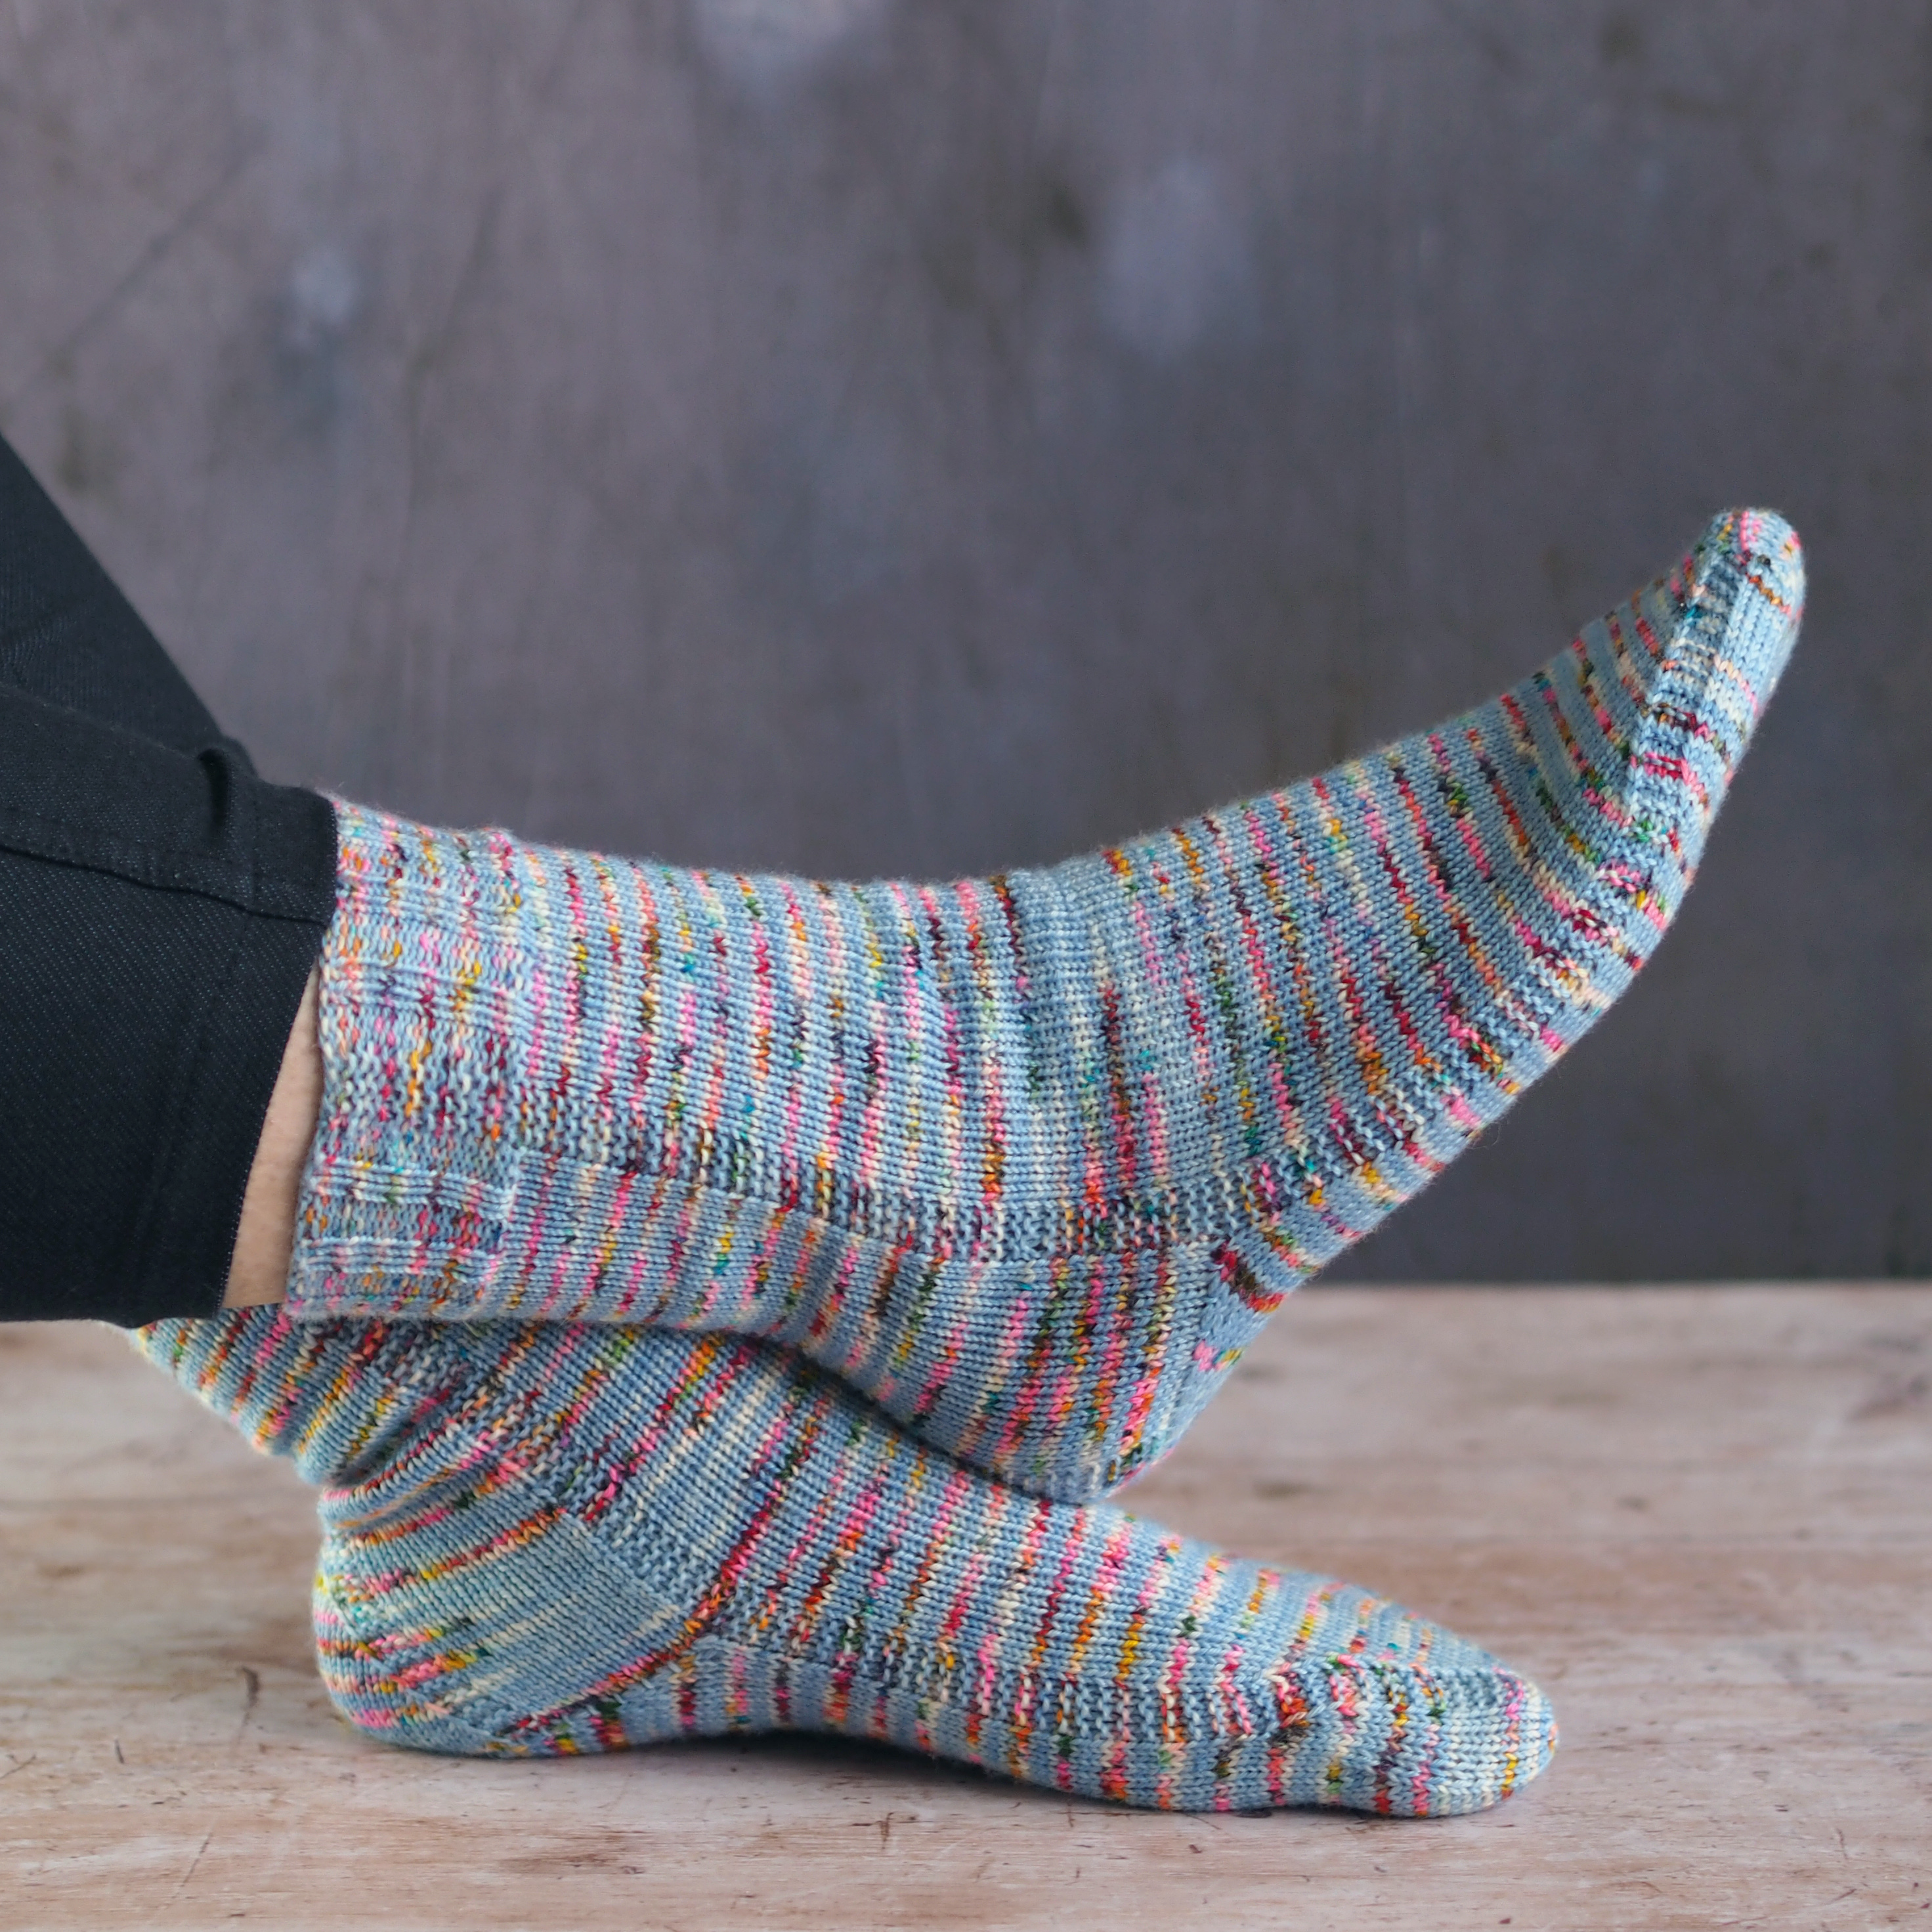 duet socks in light blue speckled yarn with strong heel and garter columns